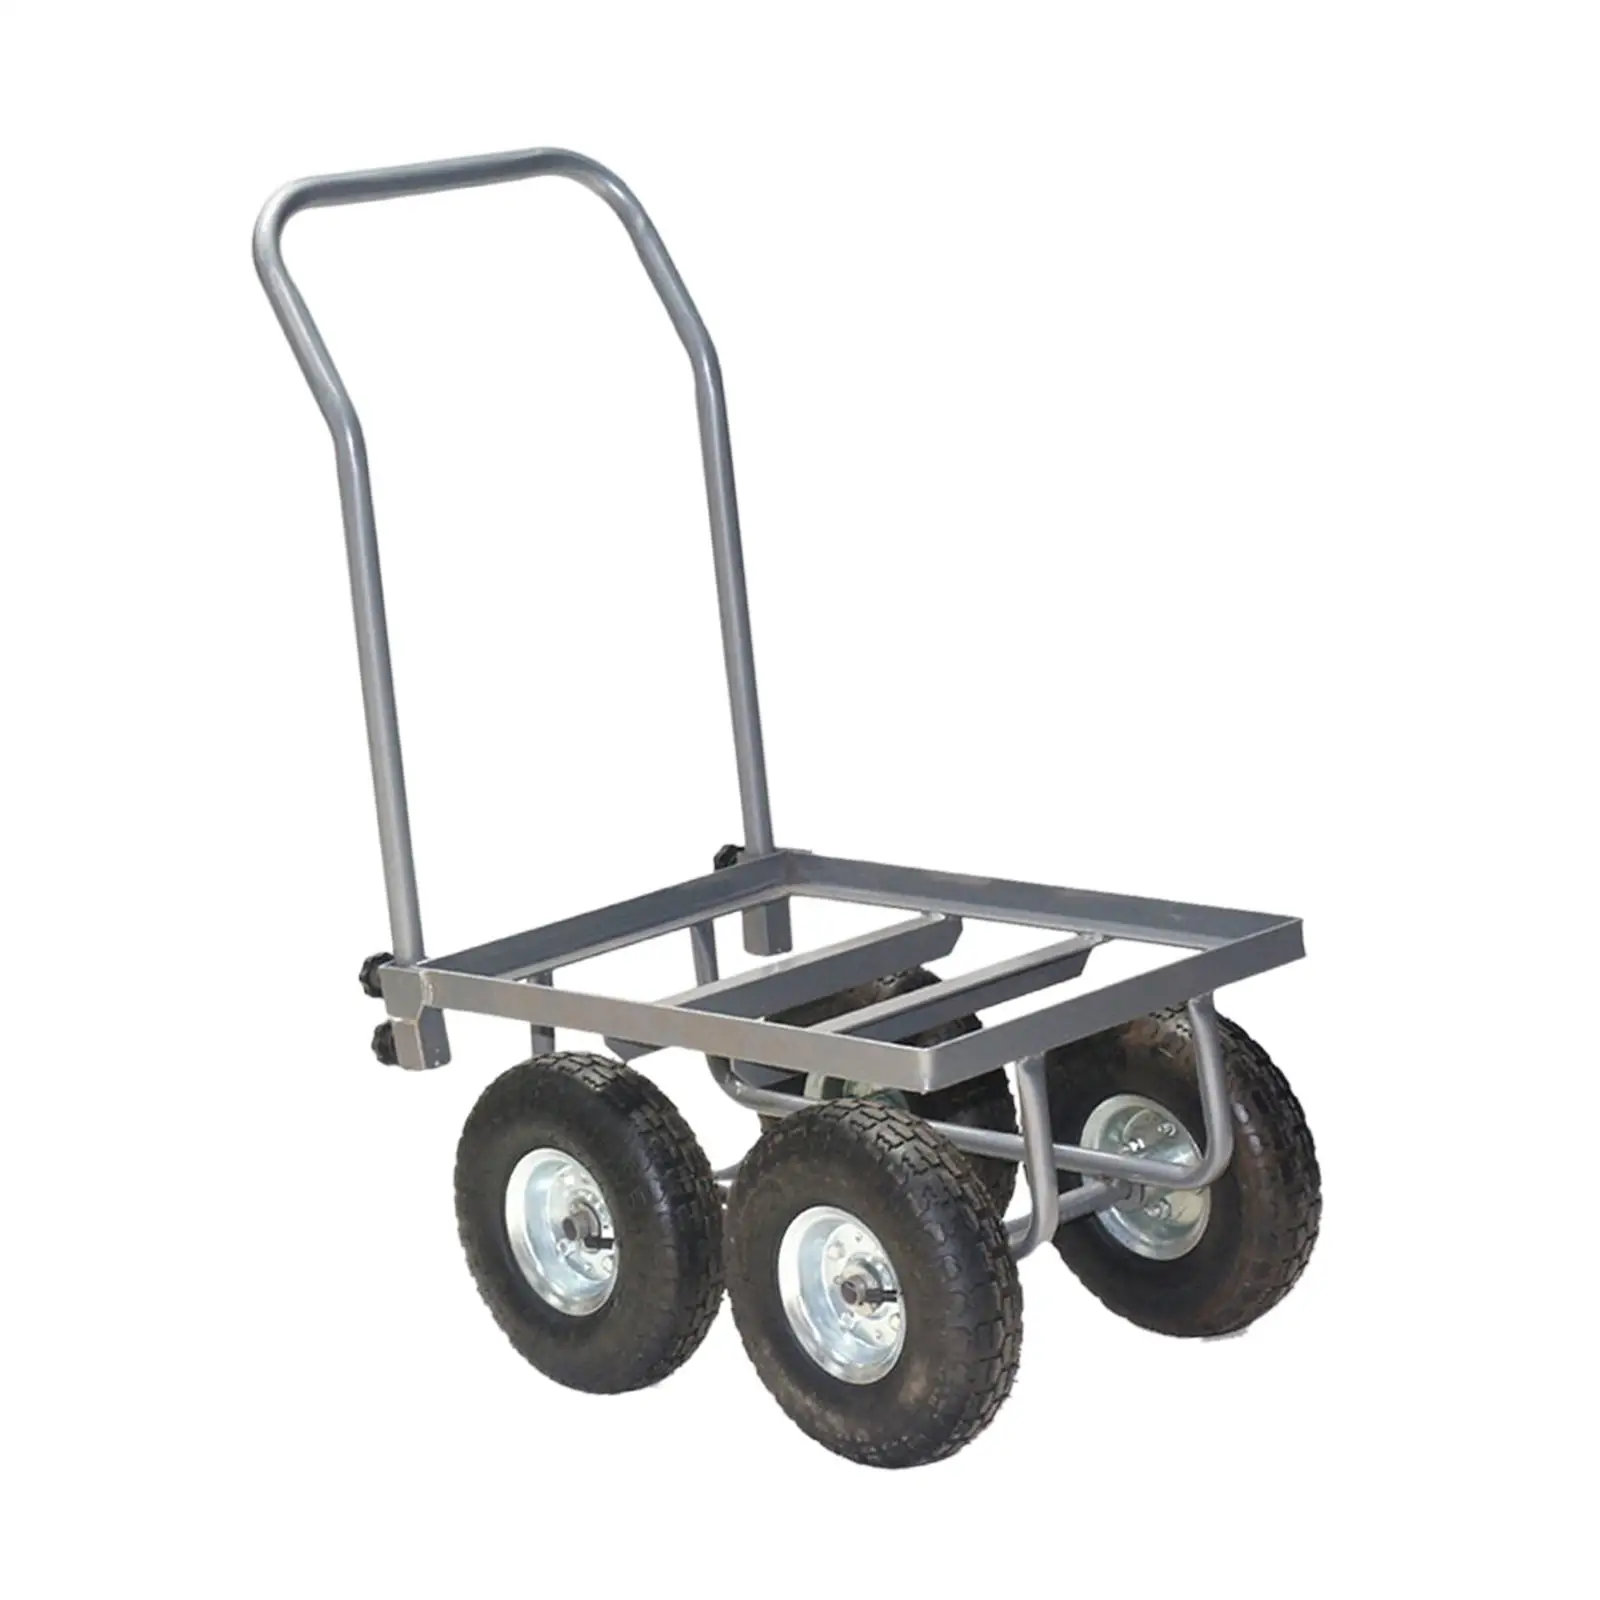 Hand Push Cart Moving Flatbed Cart for Furniture Flower Pots Shopping Malls